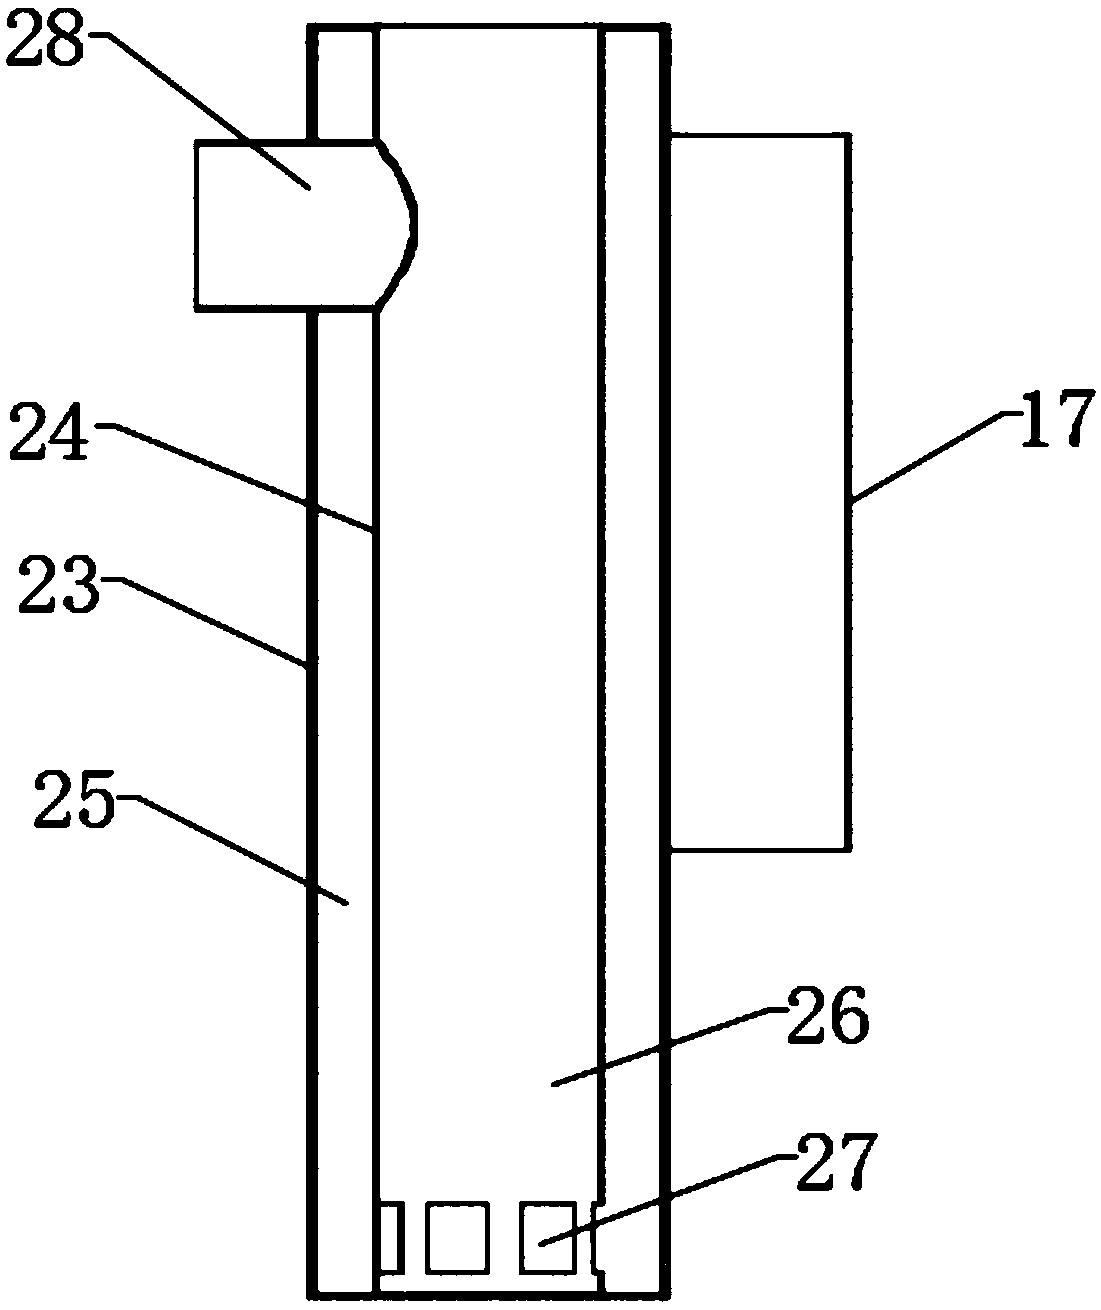 Airflow heating device